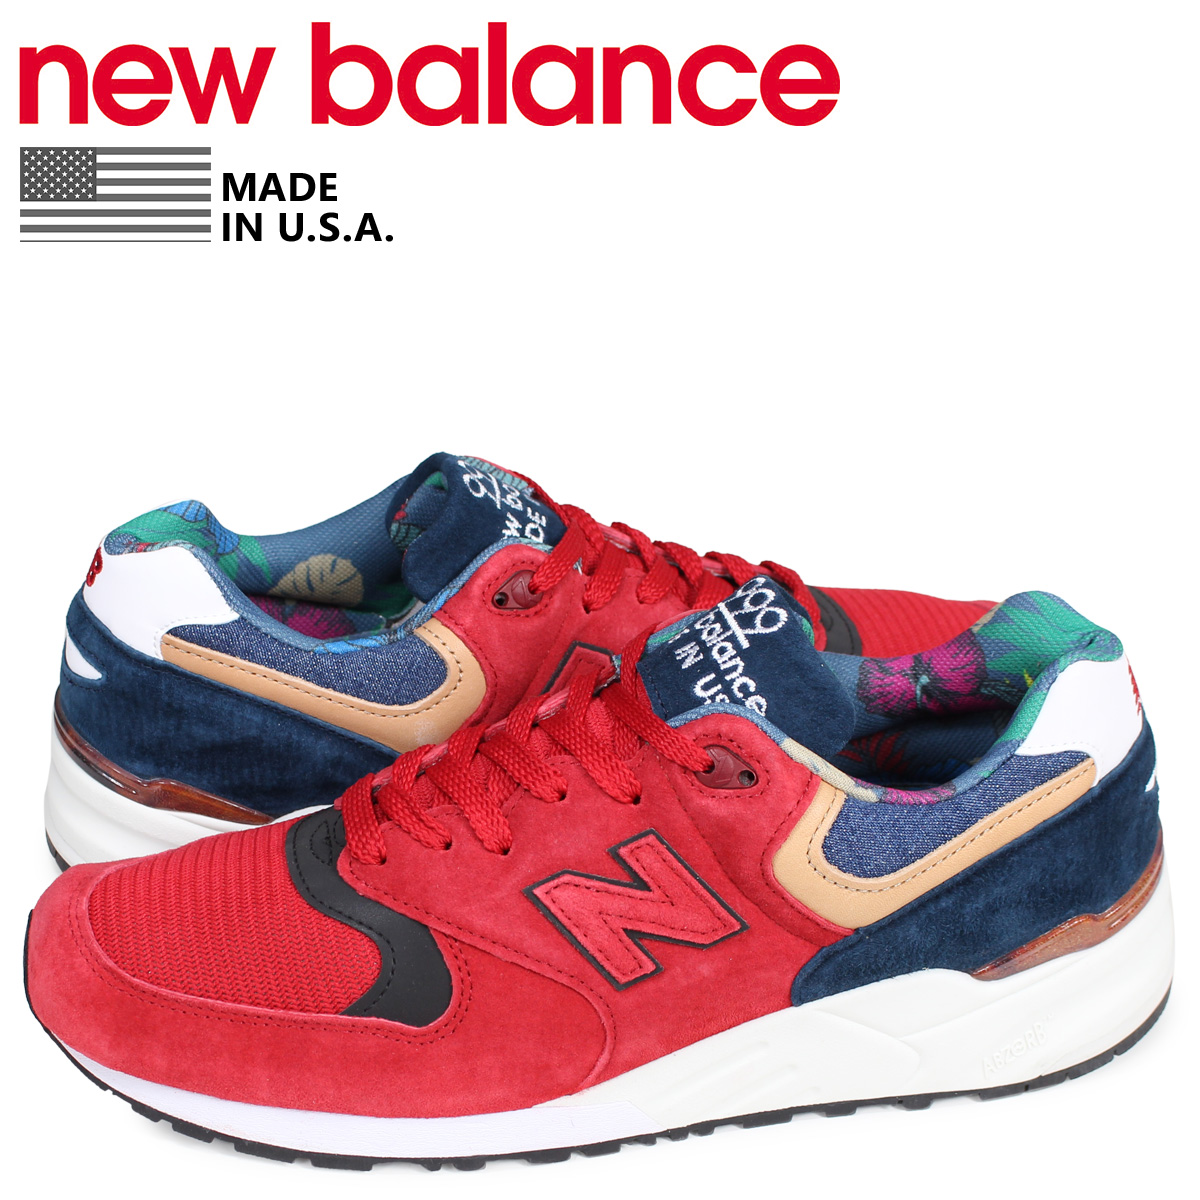 SneaK Online Shop: New Balance new balance 999 sneakers men CLASSICS D Wise MADE IN USA red